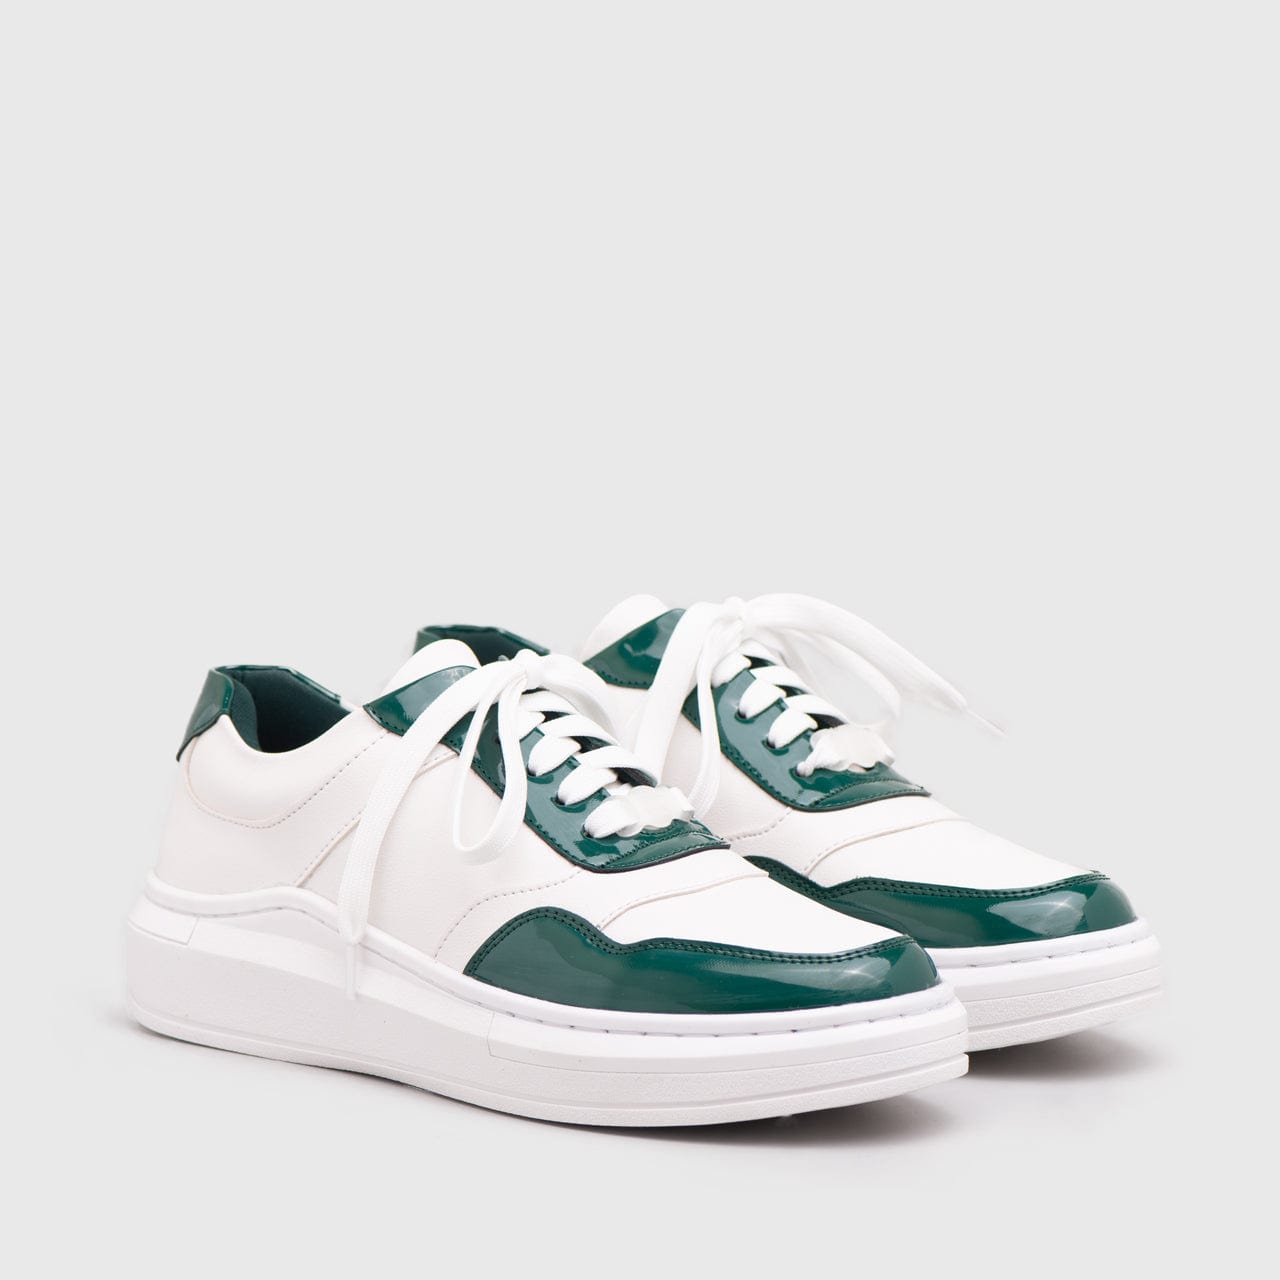 Adorable Projects Official Adorableprojects - Saldana Sneakers White Green - Sneakers Putih